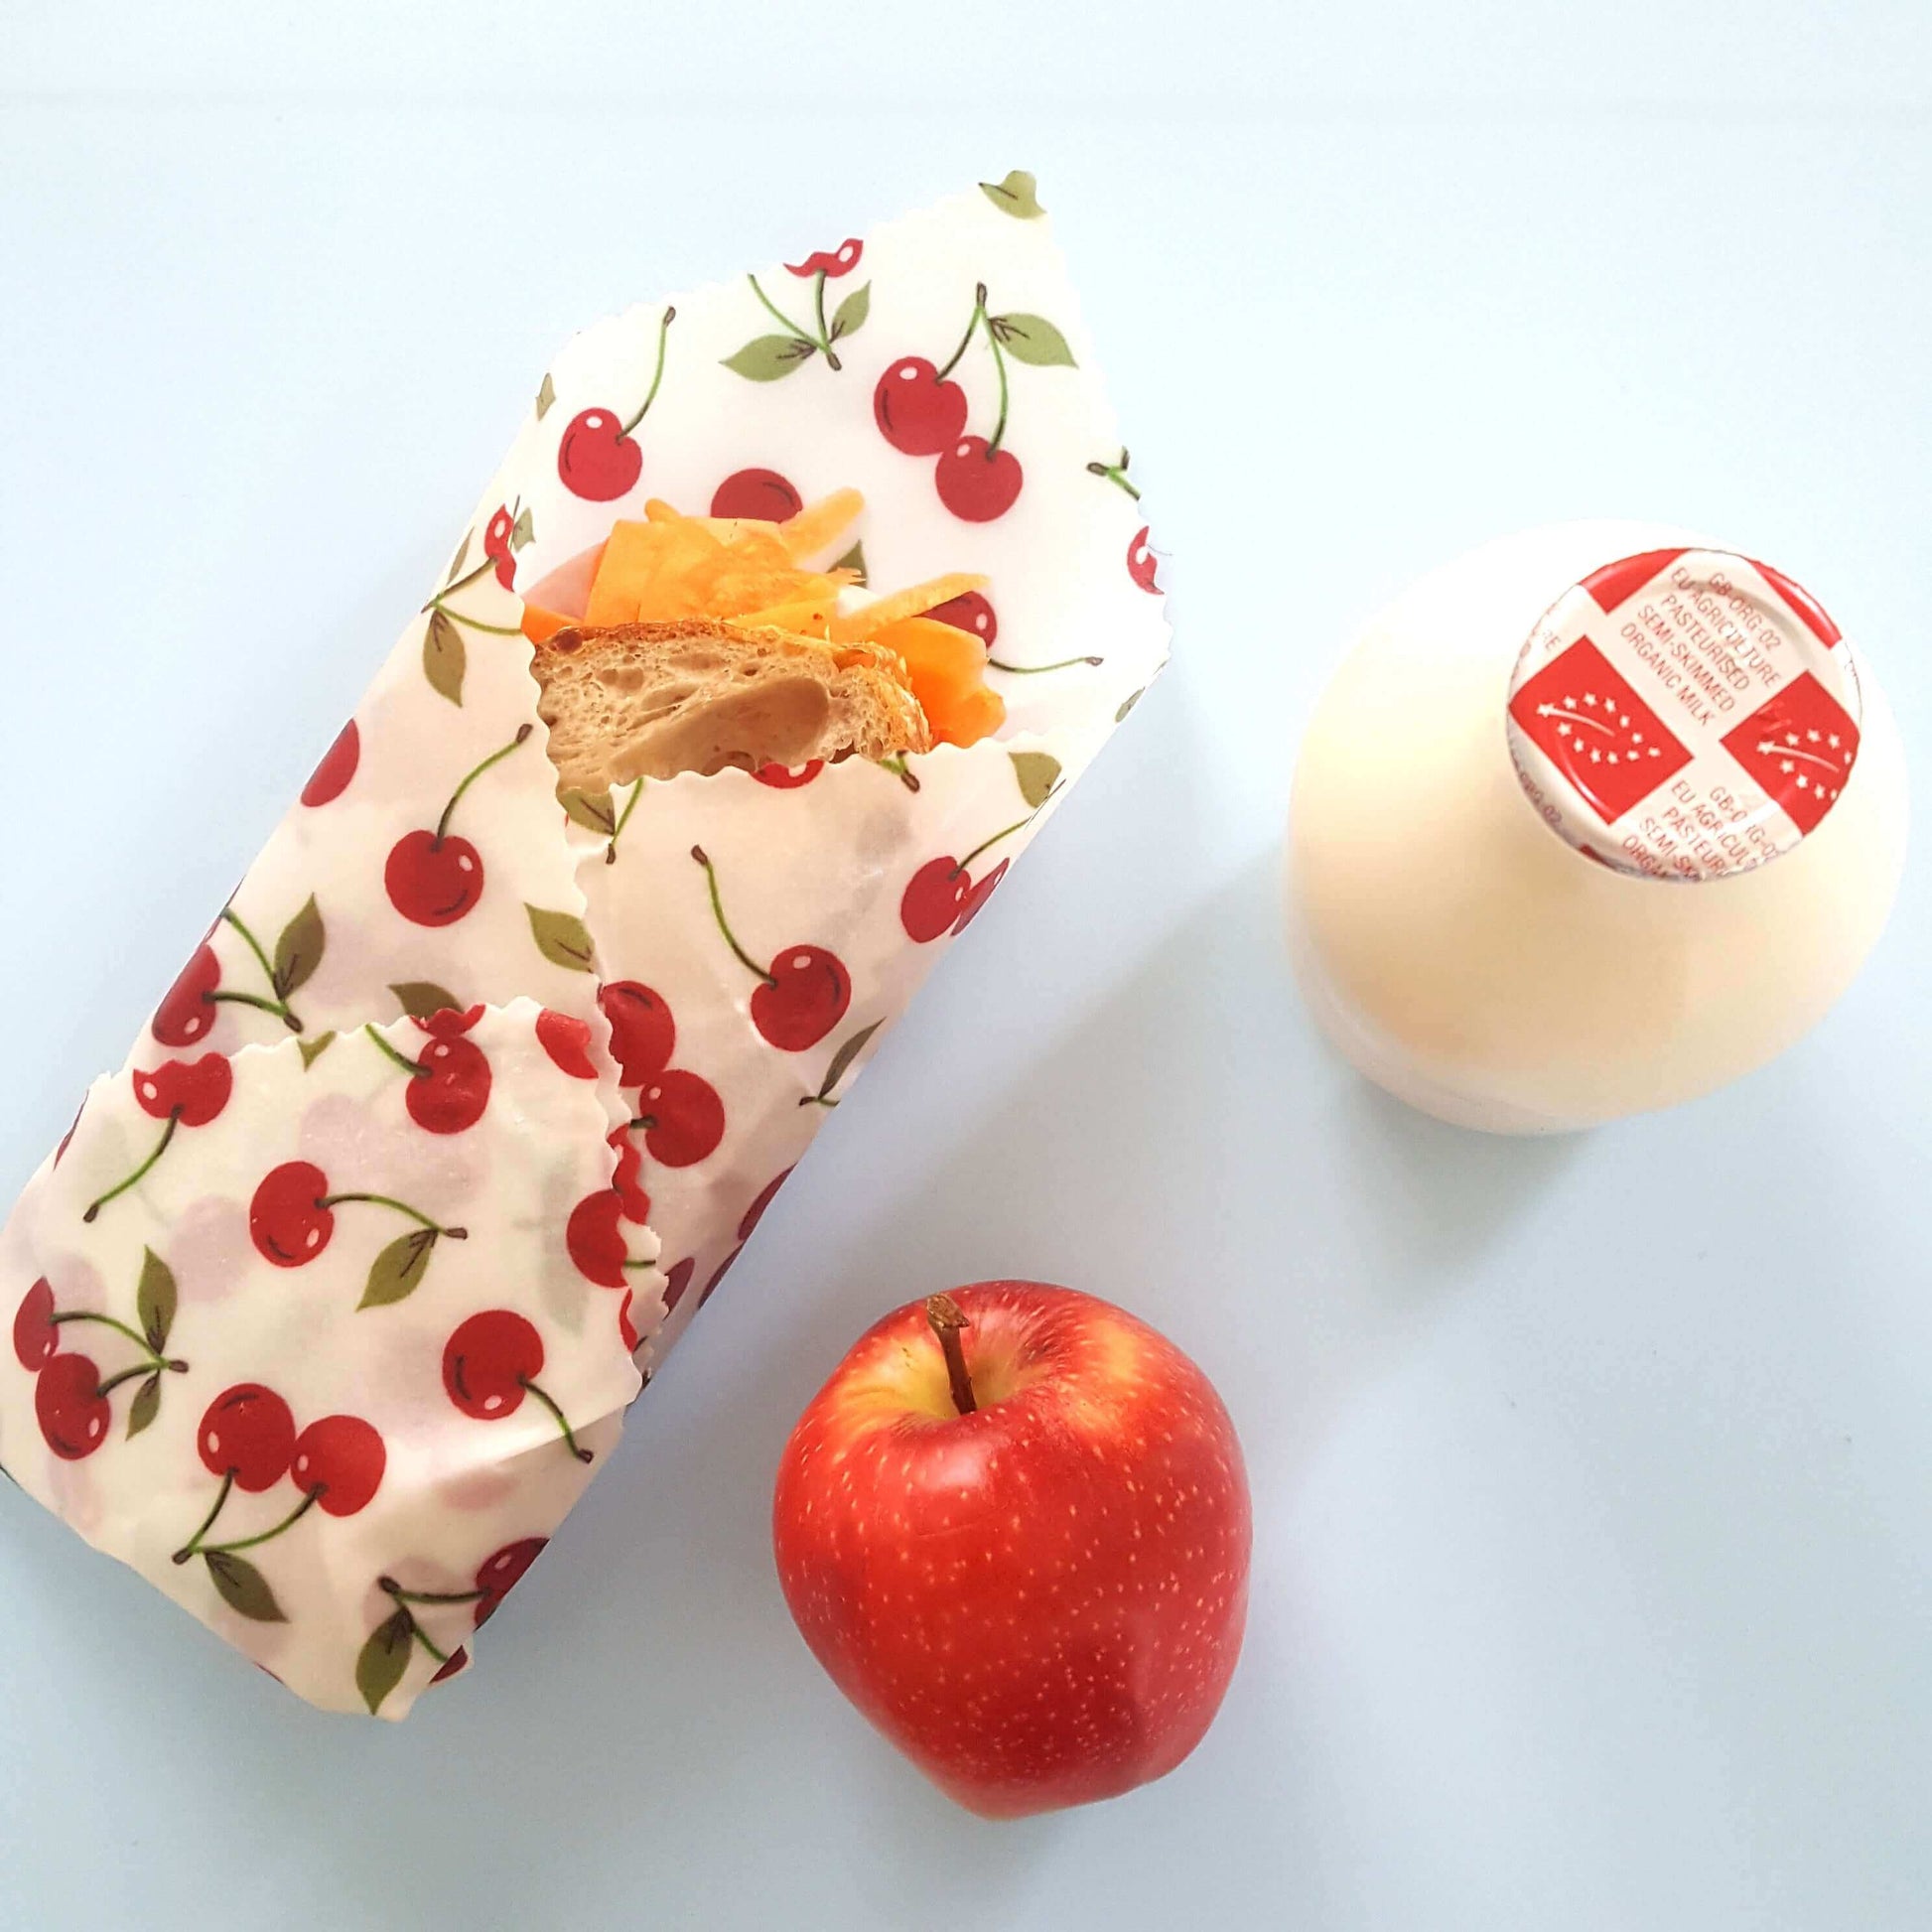 Planet-Kind single large beeswax wrap in Cherries pattern as flatlay